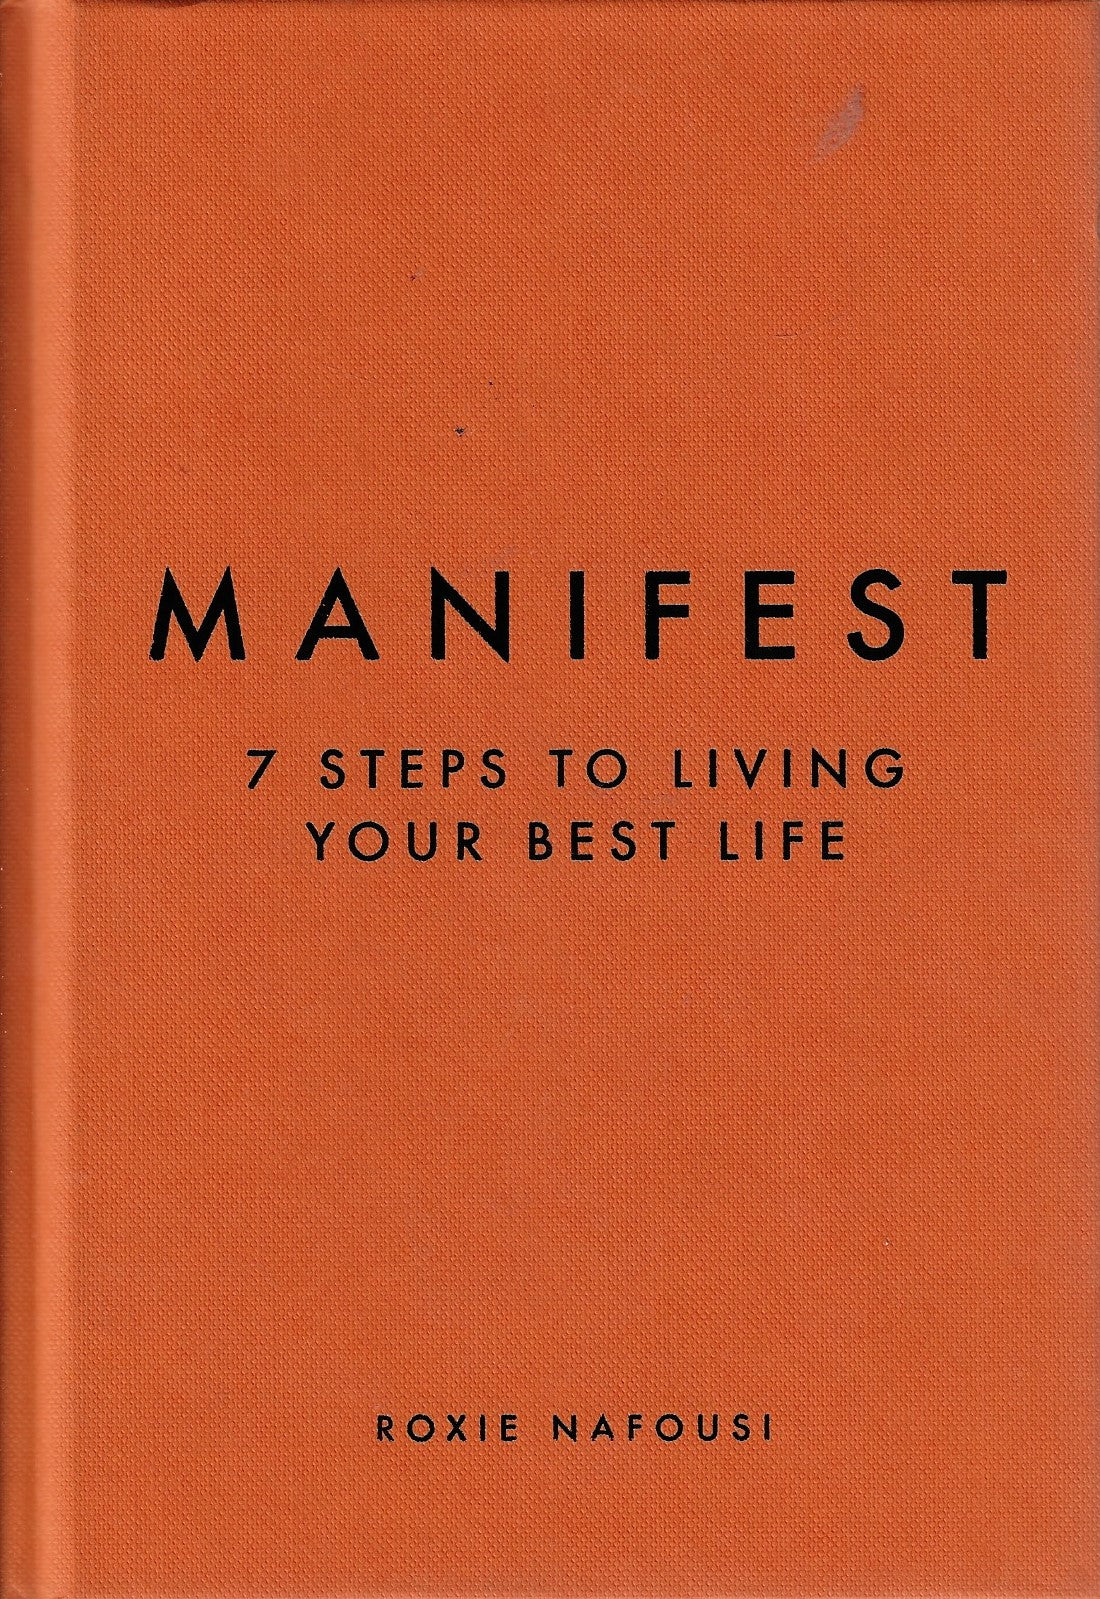 Manifest - 7 Steps to Living your best Life